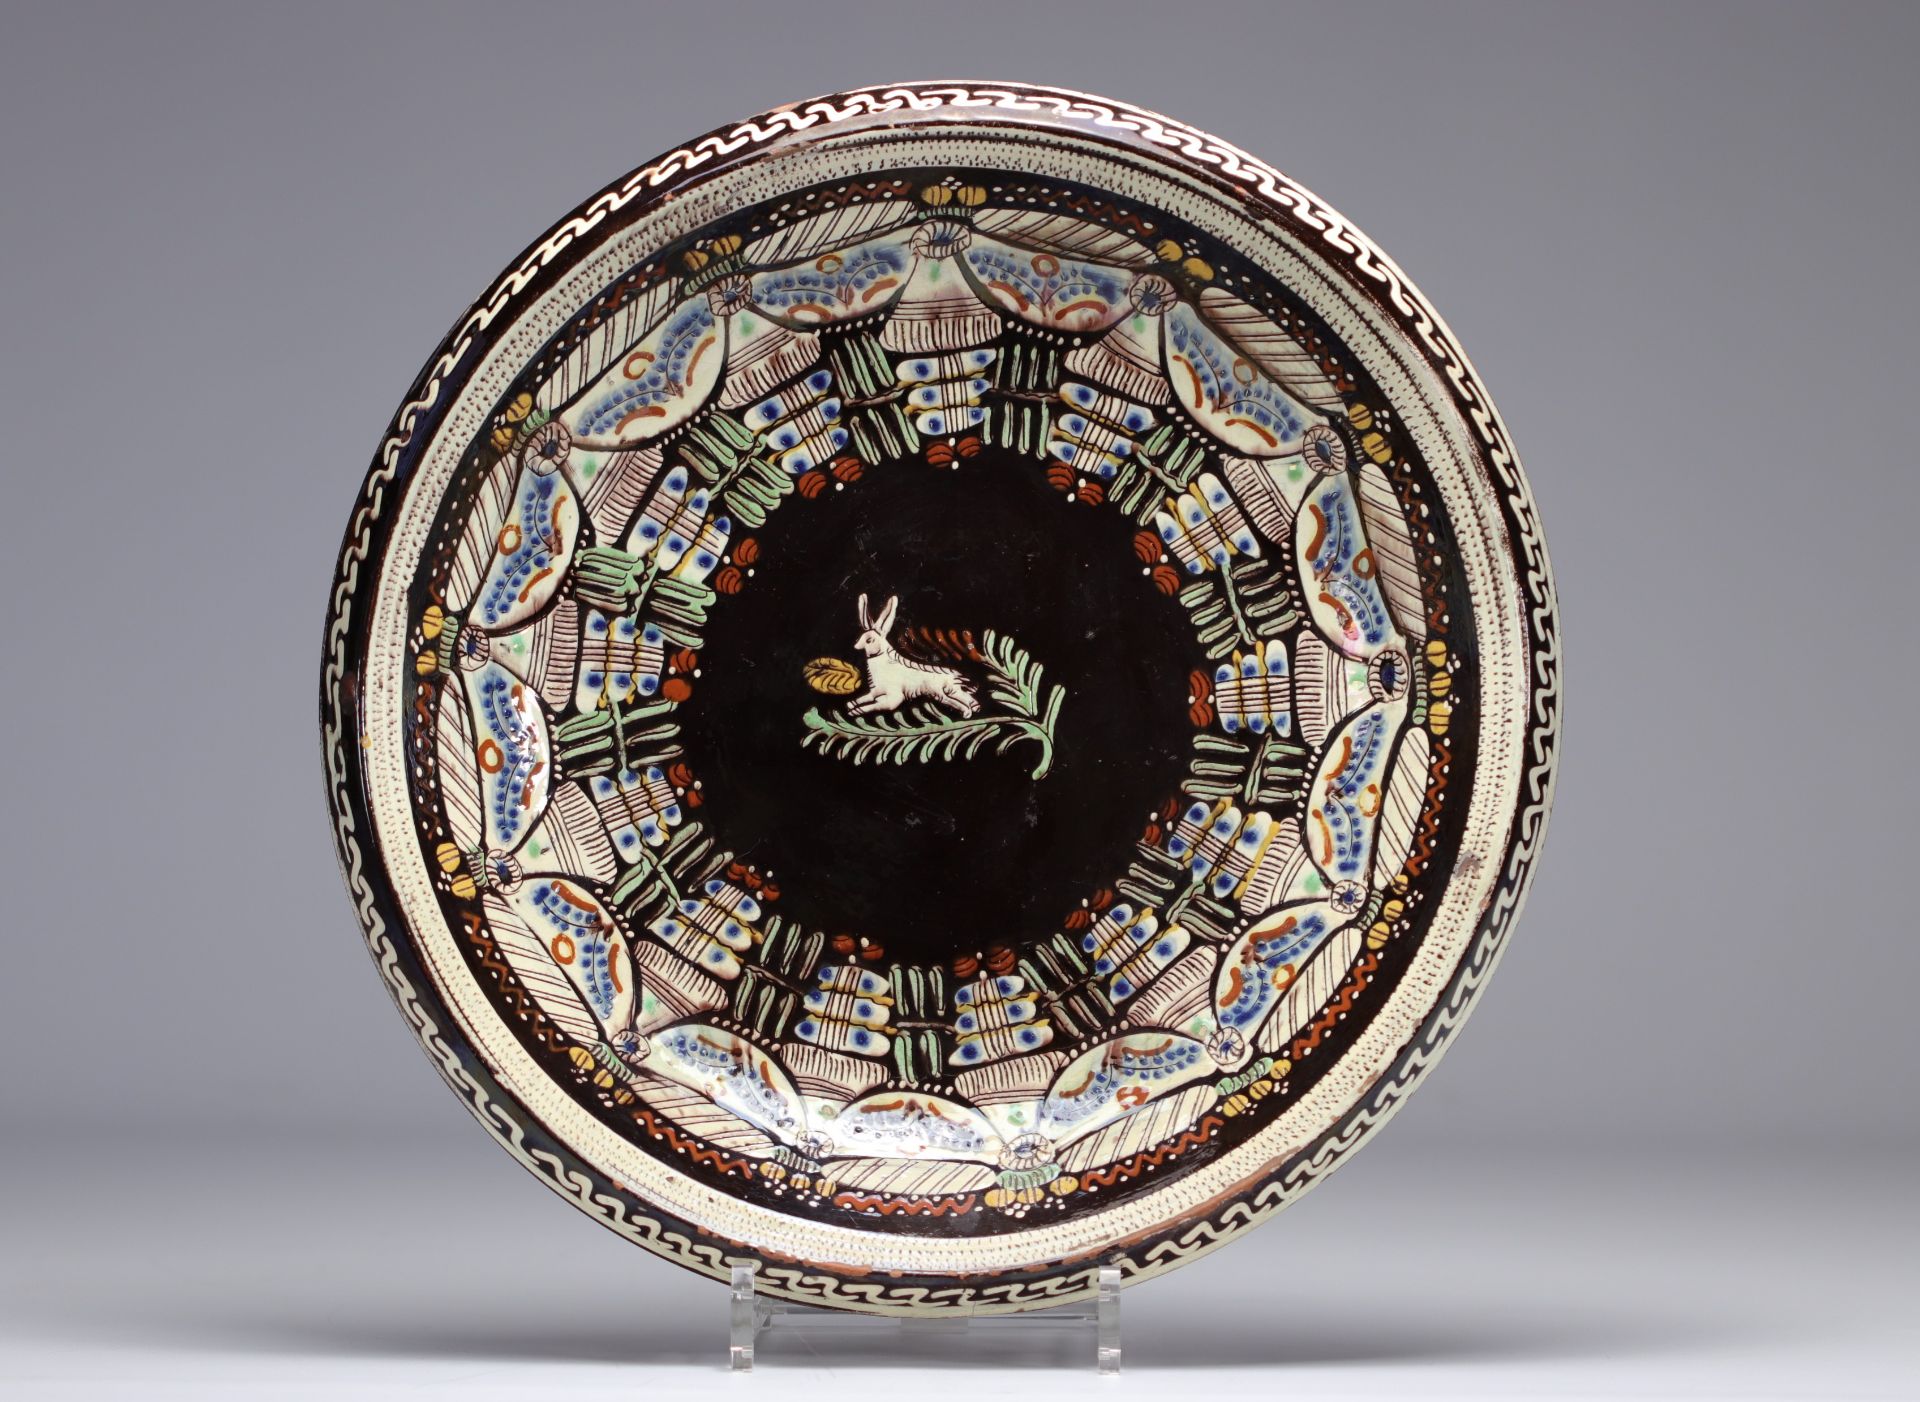 Glazed stoneware plate decorated with a rabbit